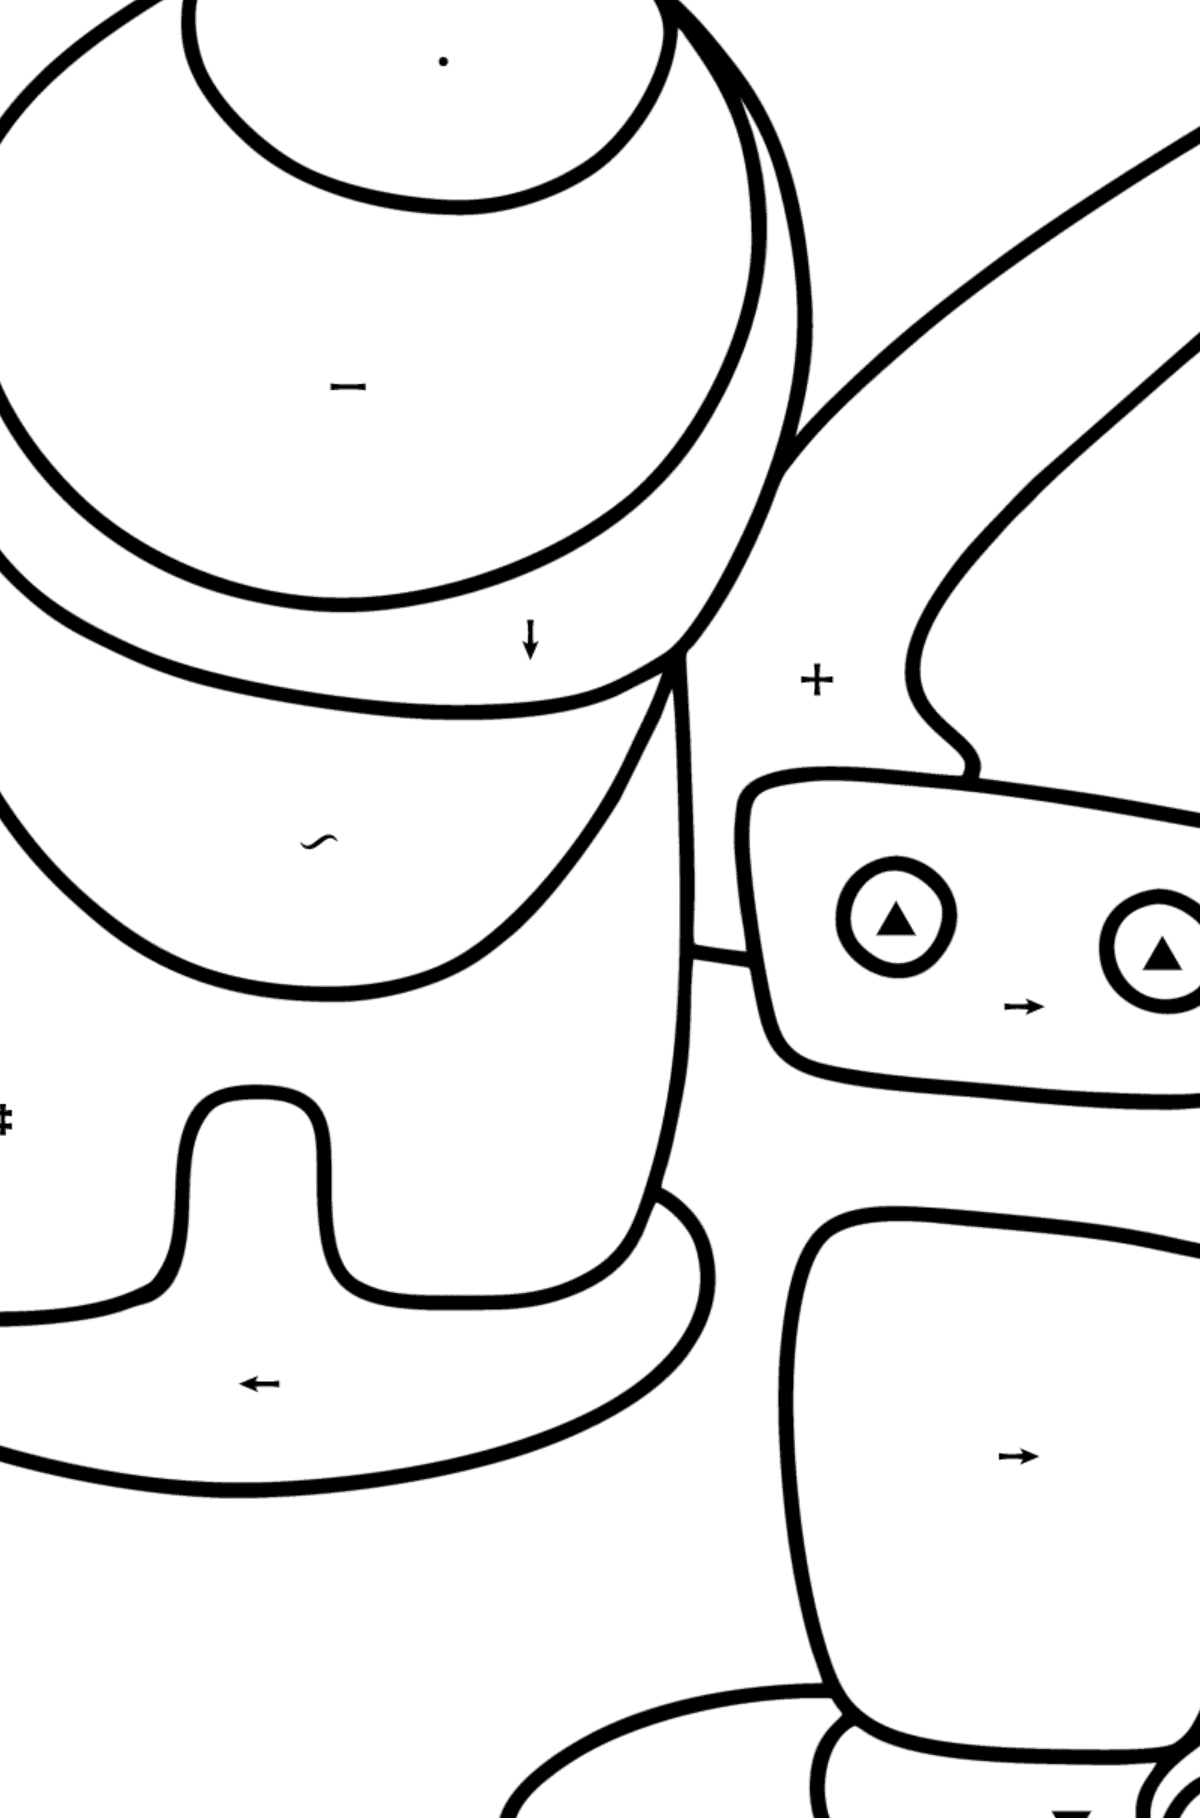 Coloring page astronaut and pet robot Among Us - Coloring by Symbols for Kids